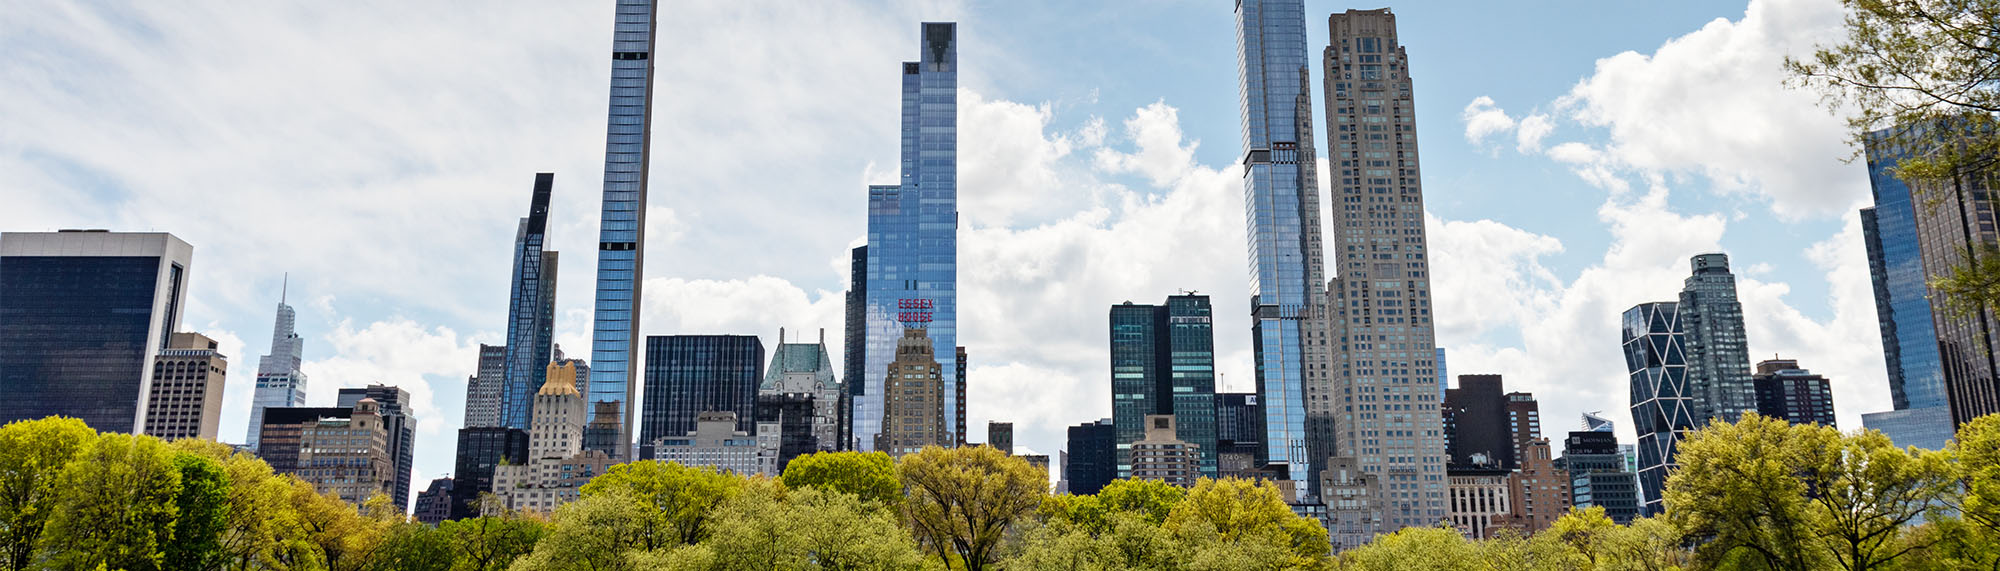 Single Property Real Estate Websites Cover Image: A scene of NYC Skyline from Central Park